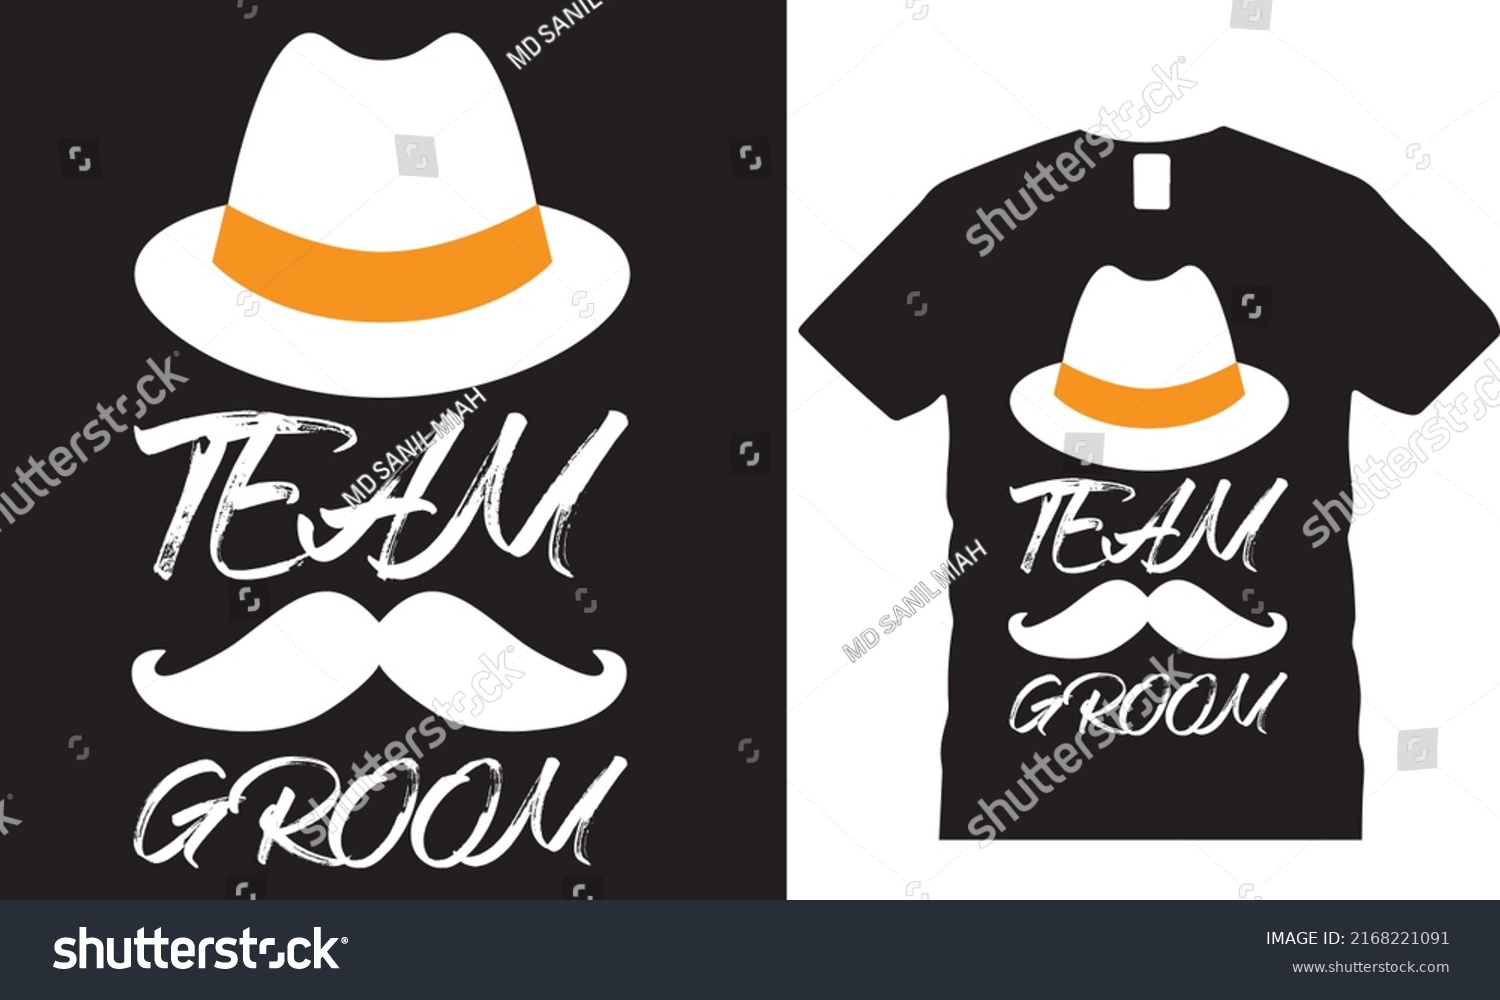 SVG of Team Groom Graphic T-shirt Desing t-shirt and poster vector design template. cap tshirt with deer, Beard, vectors. Grungy design for label, emblem, badge. Funny quote. svg